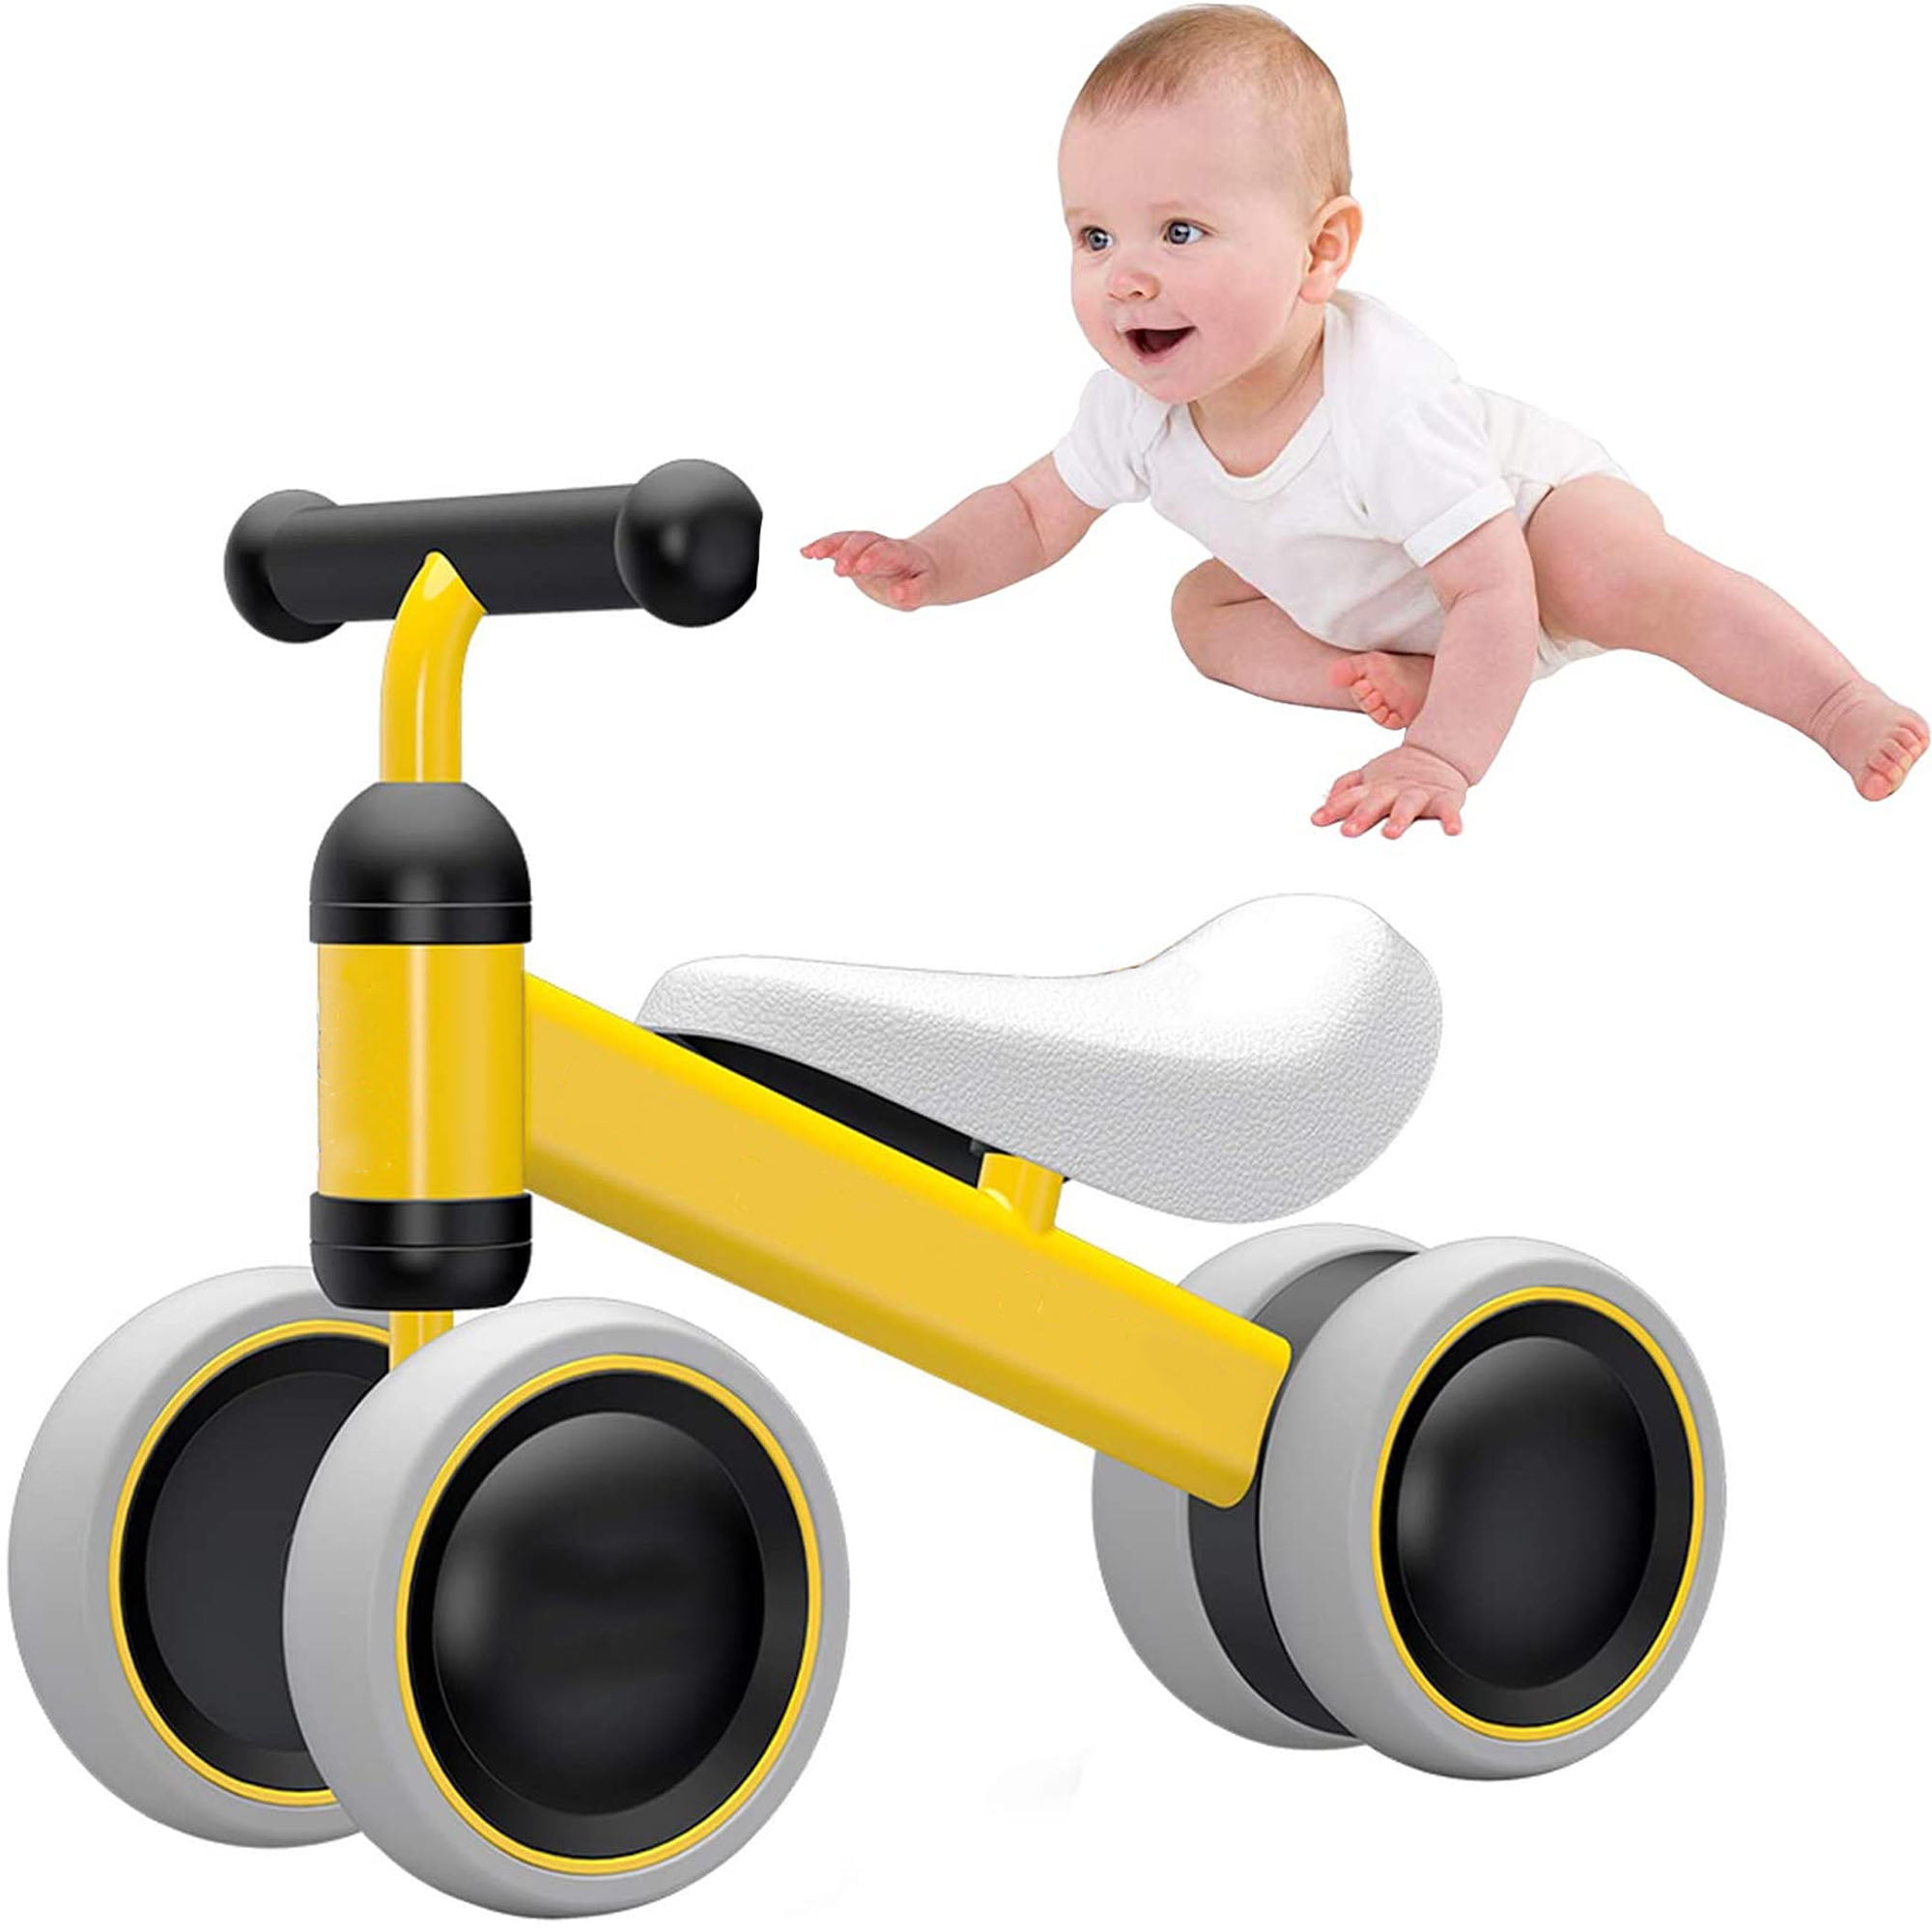 Baby Balance Bike 1-2 Year Old Boys Girls Toddlers Riding Toy Scooter Walker Push Bicycle for Baby Kid Indoor Outdoor blue 17x48.5x36.2cm 